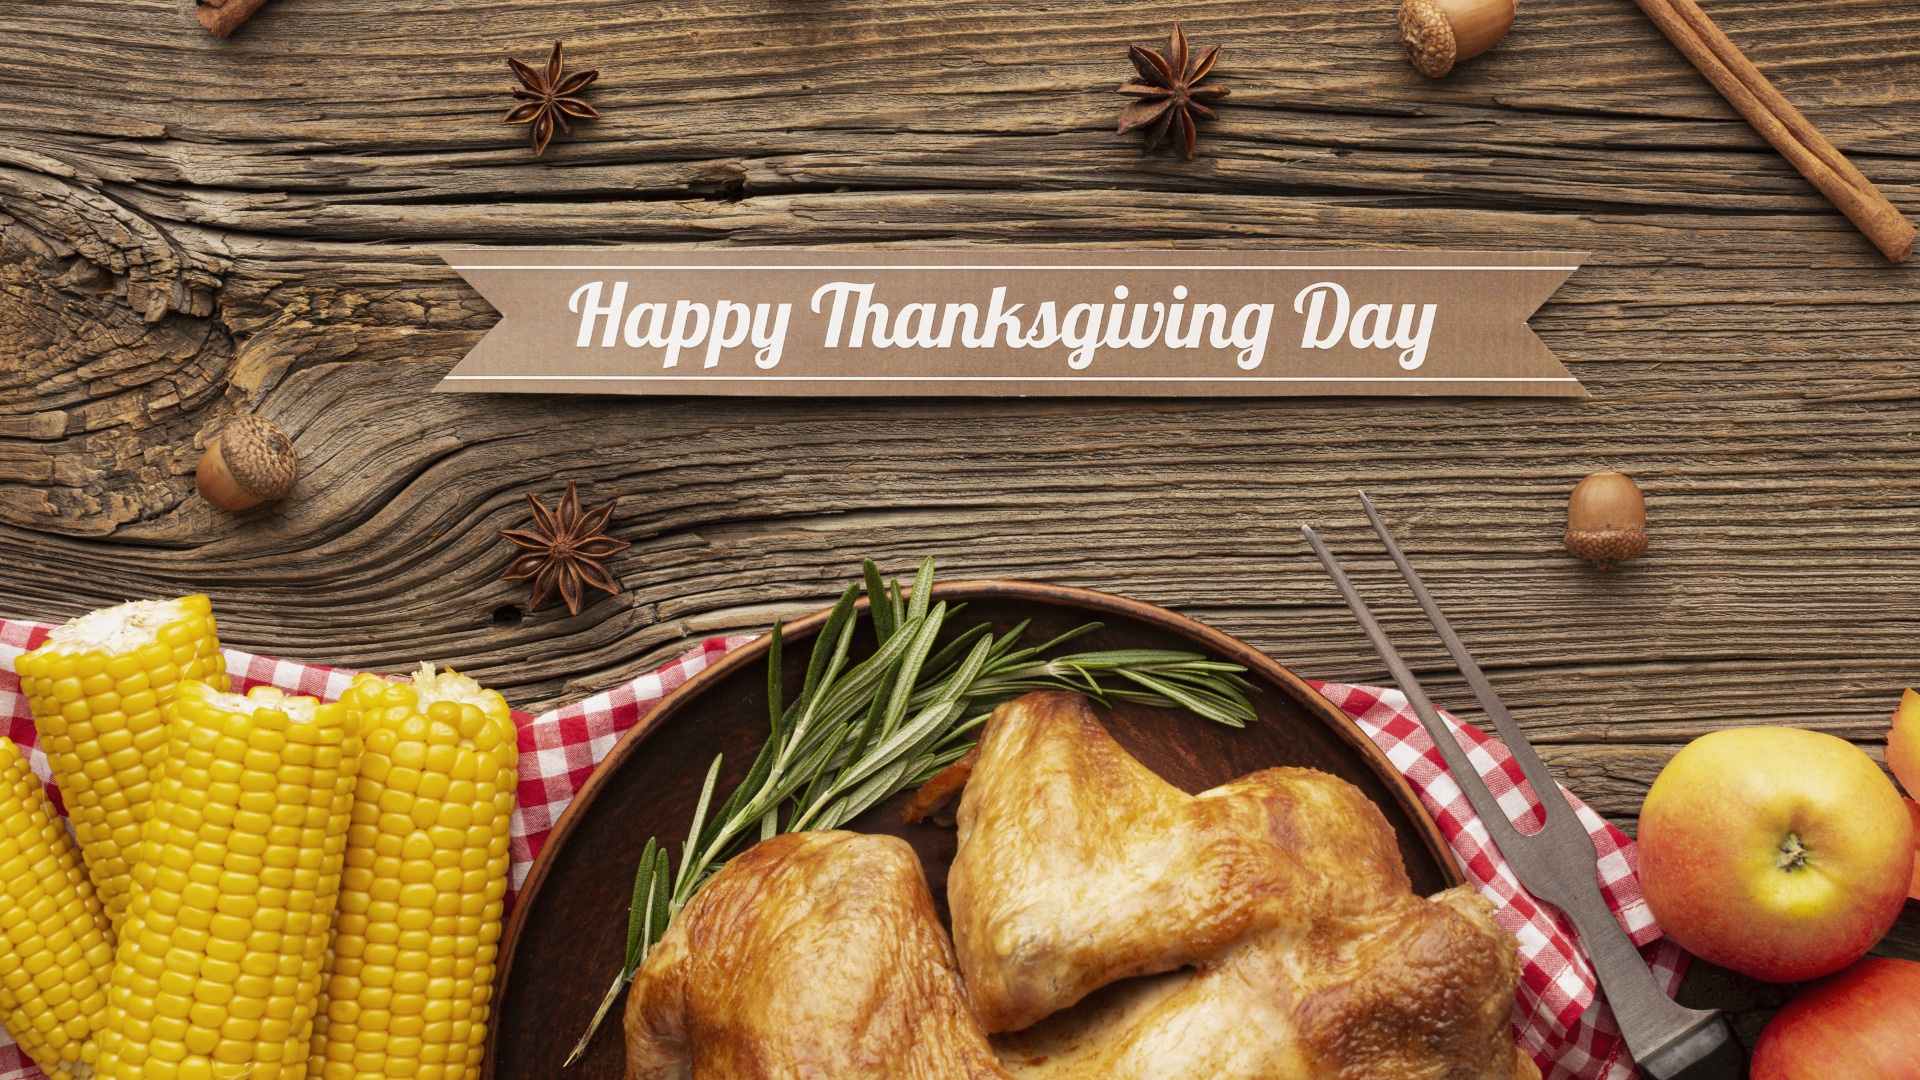 Thanksgiving Day background picture